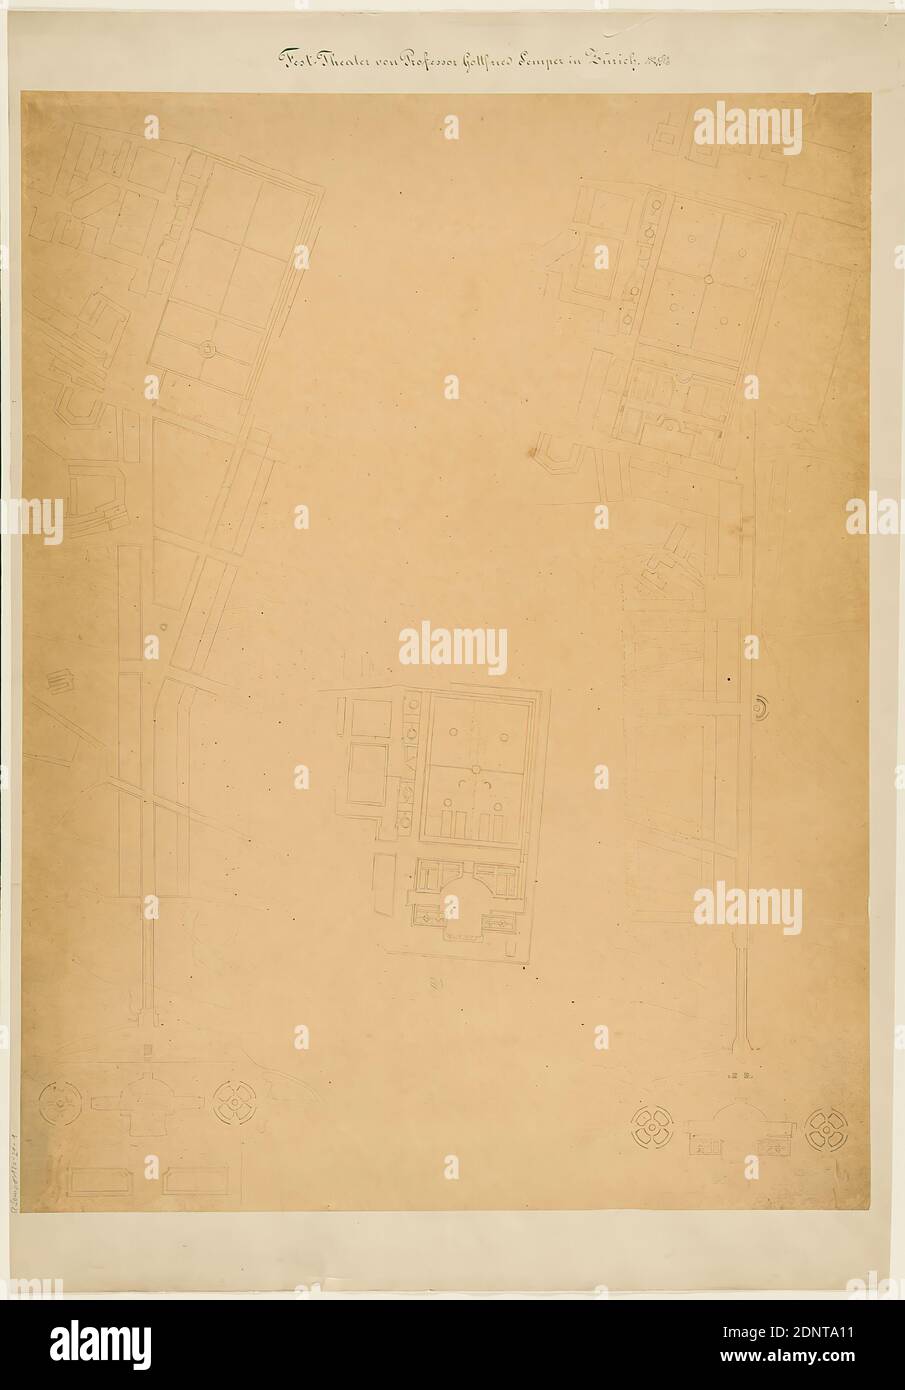 Gottfried Semper, site plan for the Richard-Wagner-Festspielhaus in the Glaspalast in Munich (Residenz-Isar), tracing paper, drawing, pen-and-ink drawing, sheet size: height: 71.8 cm; width: 54.4 cm, inscribed: recto on the cardboard: in ink: Fest-Theater by Professor Gottfried Semper in Zurich, in lead: G. Semper 180-21-1, draft drawings, design, plan of a building, opera house, architecture, architectural drawing or model Stock Photo